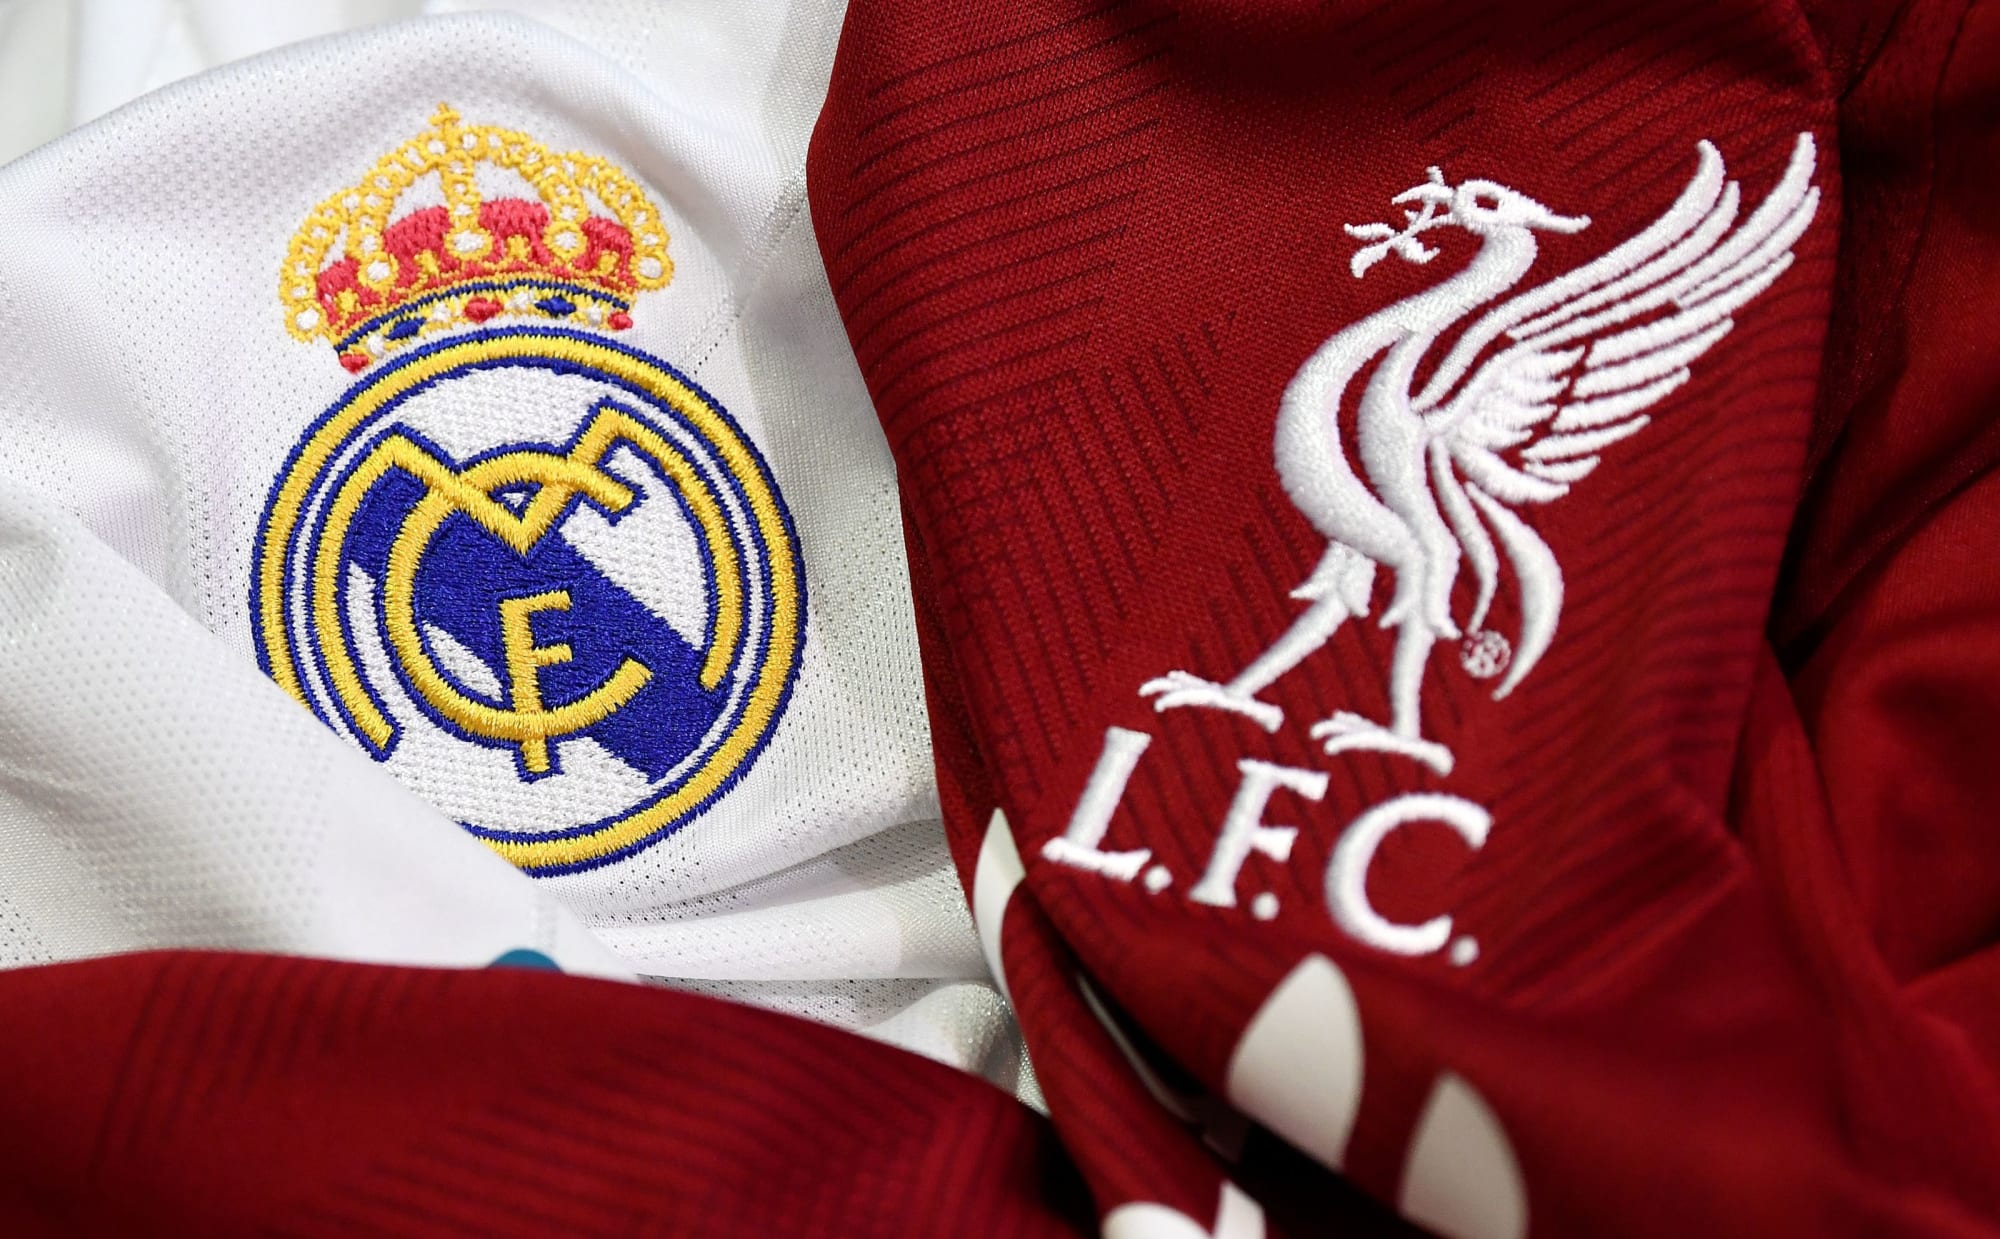 Real Madrid vs Liverpool: Key Battles in the Champions League final